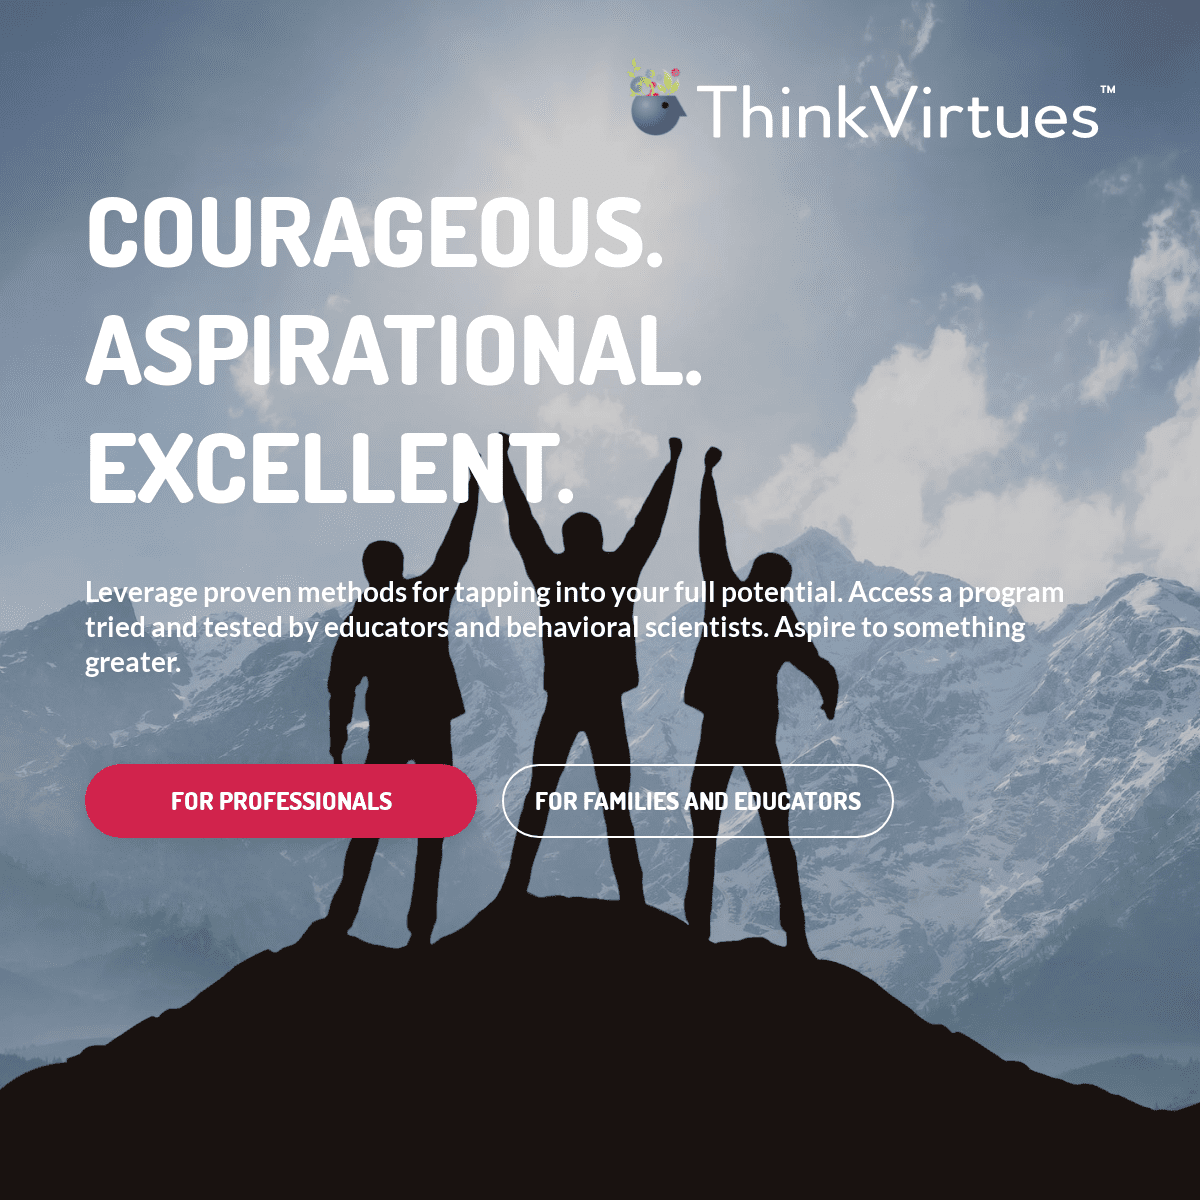 ThinkVirtues - Leverage proven methods for tapping into your full potential. Courageous. Aspirational. Excellence.